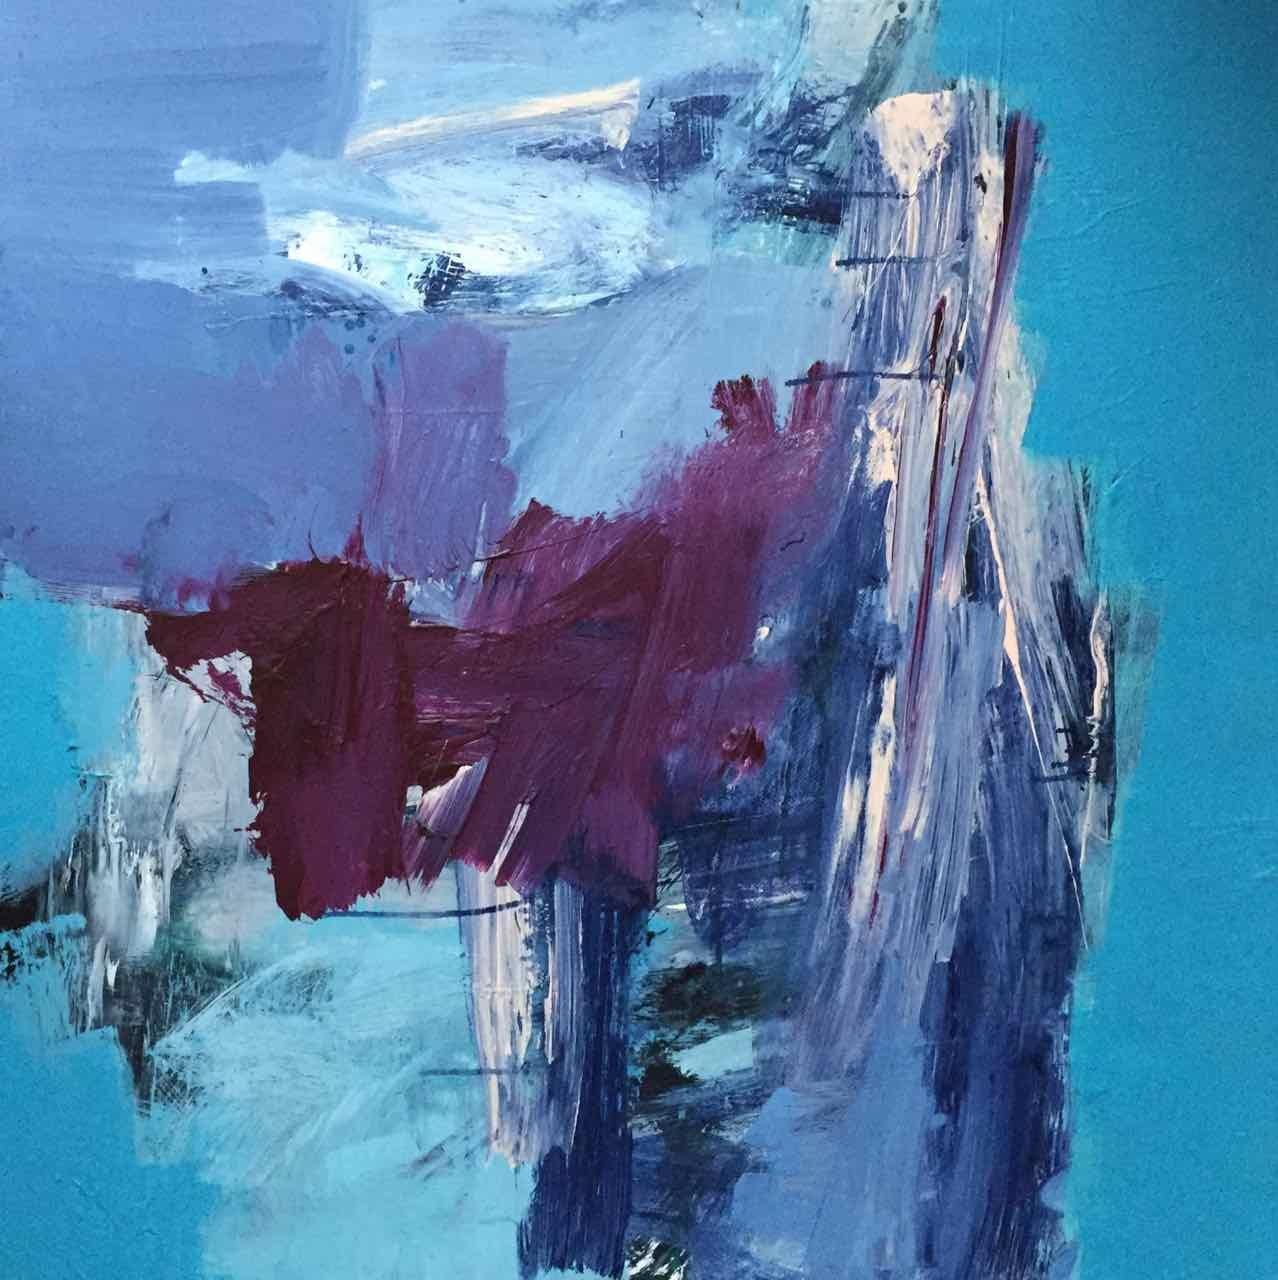 Antibes: Abstract Painting in Blues and Purples by Deborah Lanyon